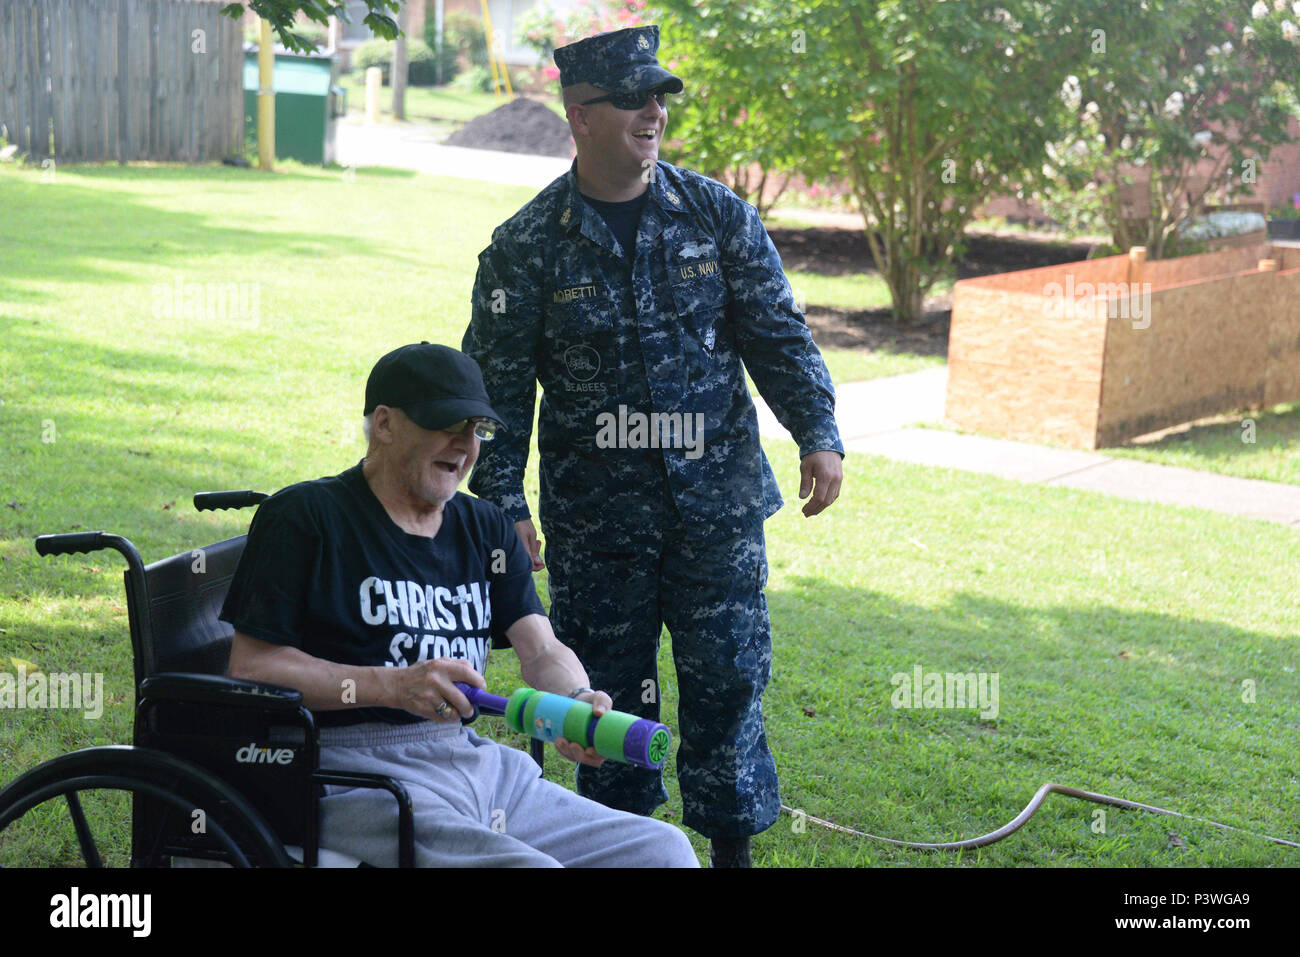 160722-N-FU443-013 NASHVILLE (July 22, 2016) Chief Equipment Operator Michael Moretti cheers on a resident during an outdoor game where residents attempted to sink paper battleships with squirt guns and water balloons at the Azalea Trace Assisted Living facility. Several members of Navy Recruiting District Nashville volunteered for the event in order to reach out to local members of the community. (U.S. Navy photo by Mass Communication Specialist 1st Class Timothy Walter/Released) Stock Photo